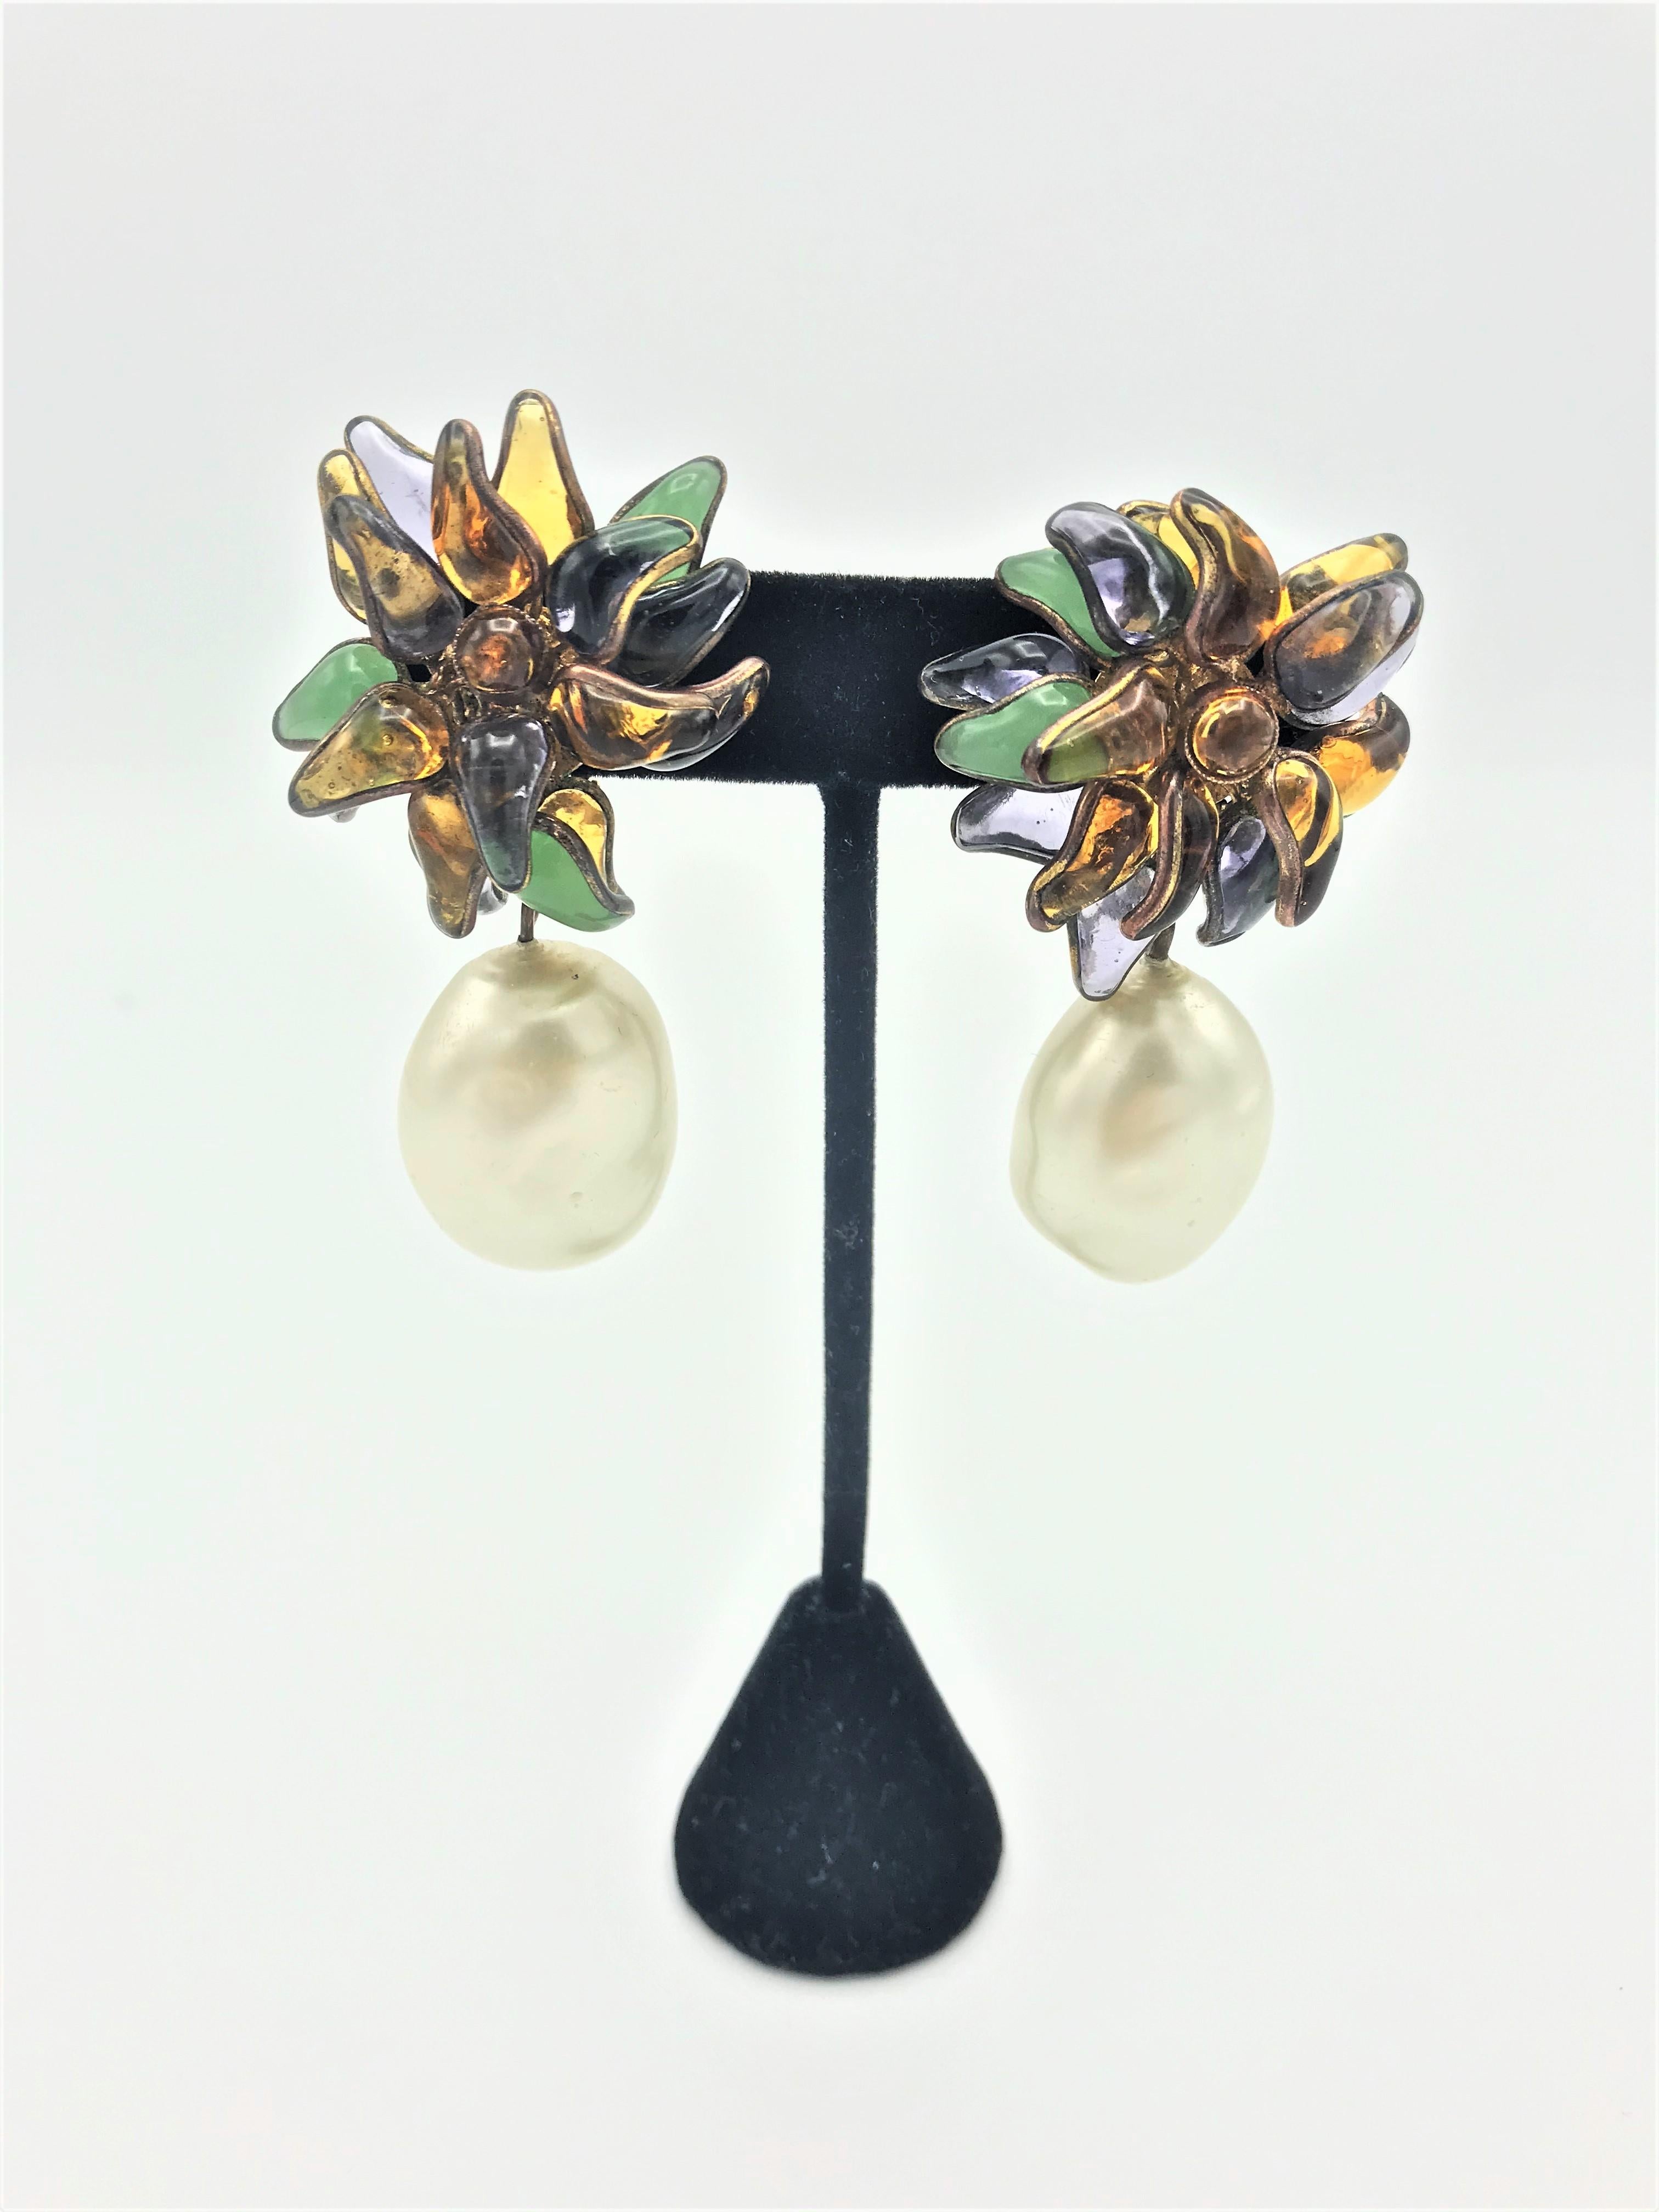 Women's  Chanel ear clips by Maison Gripoix with large pearls attached, signed 2CC8  For Sale